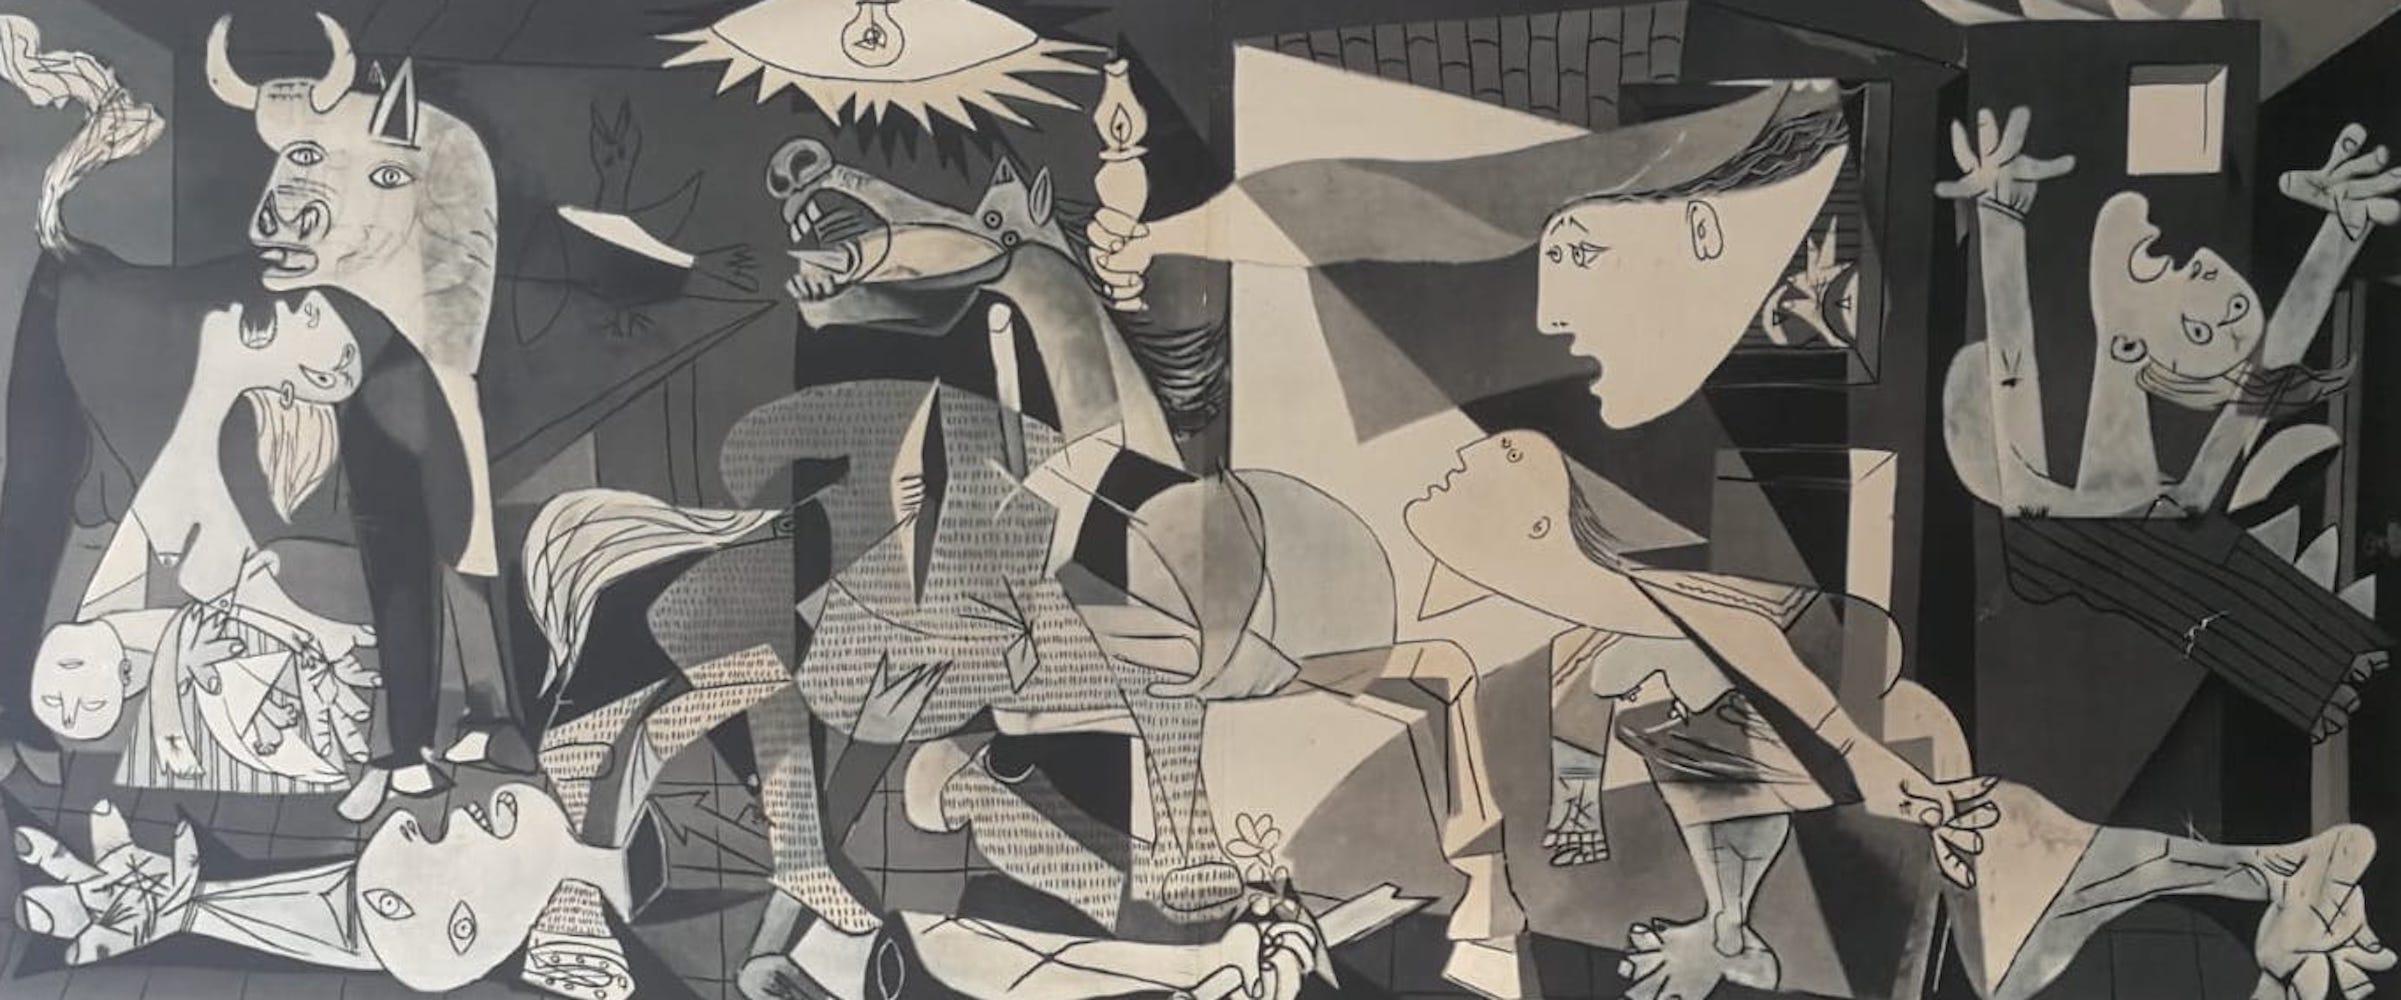 picasso guernica poster